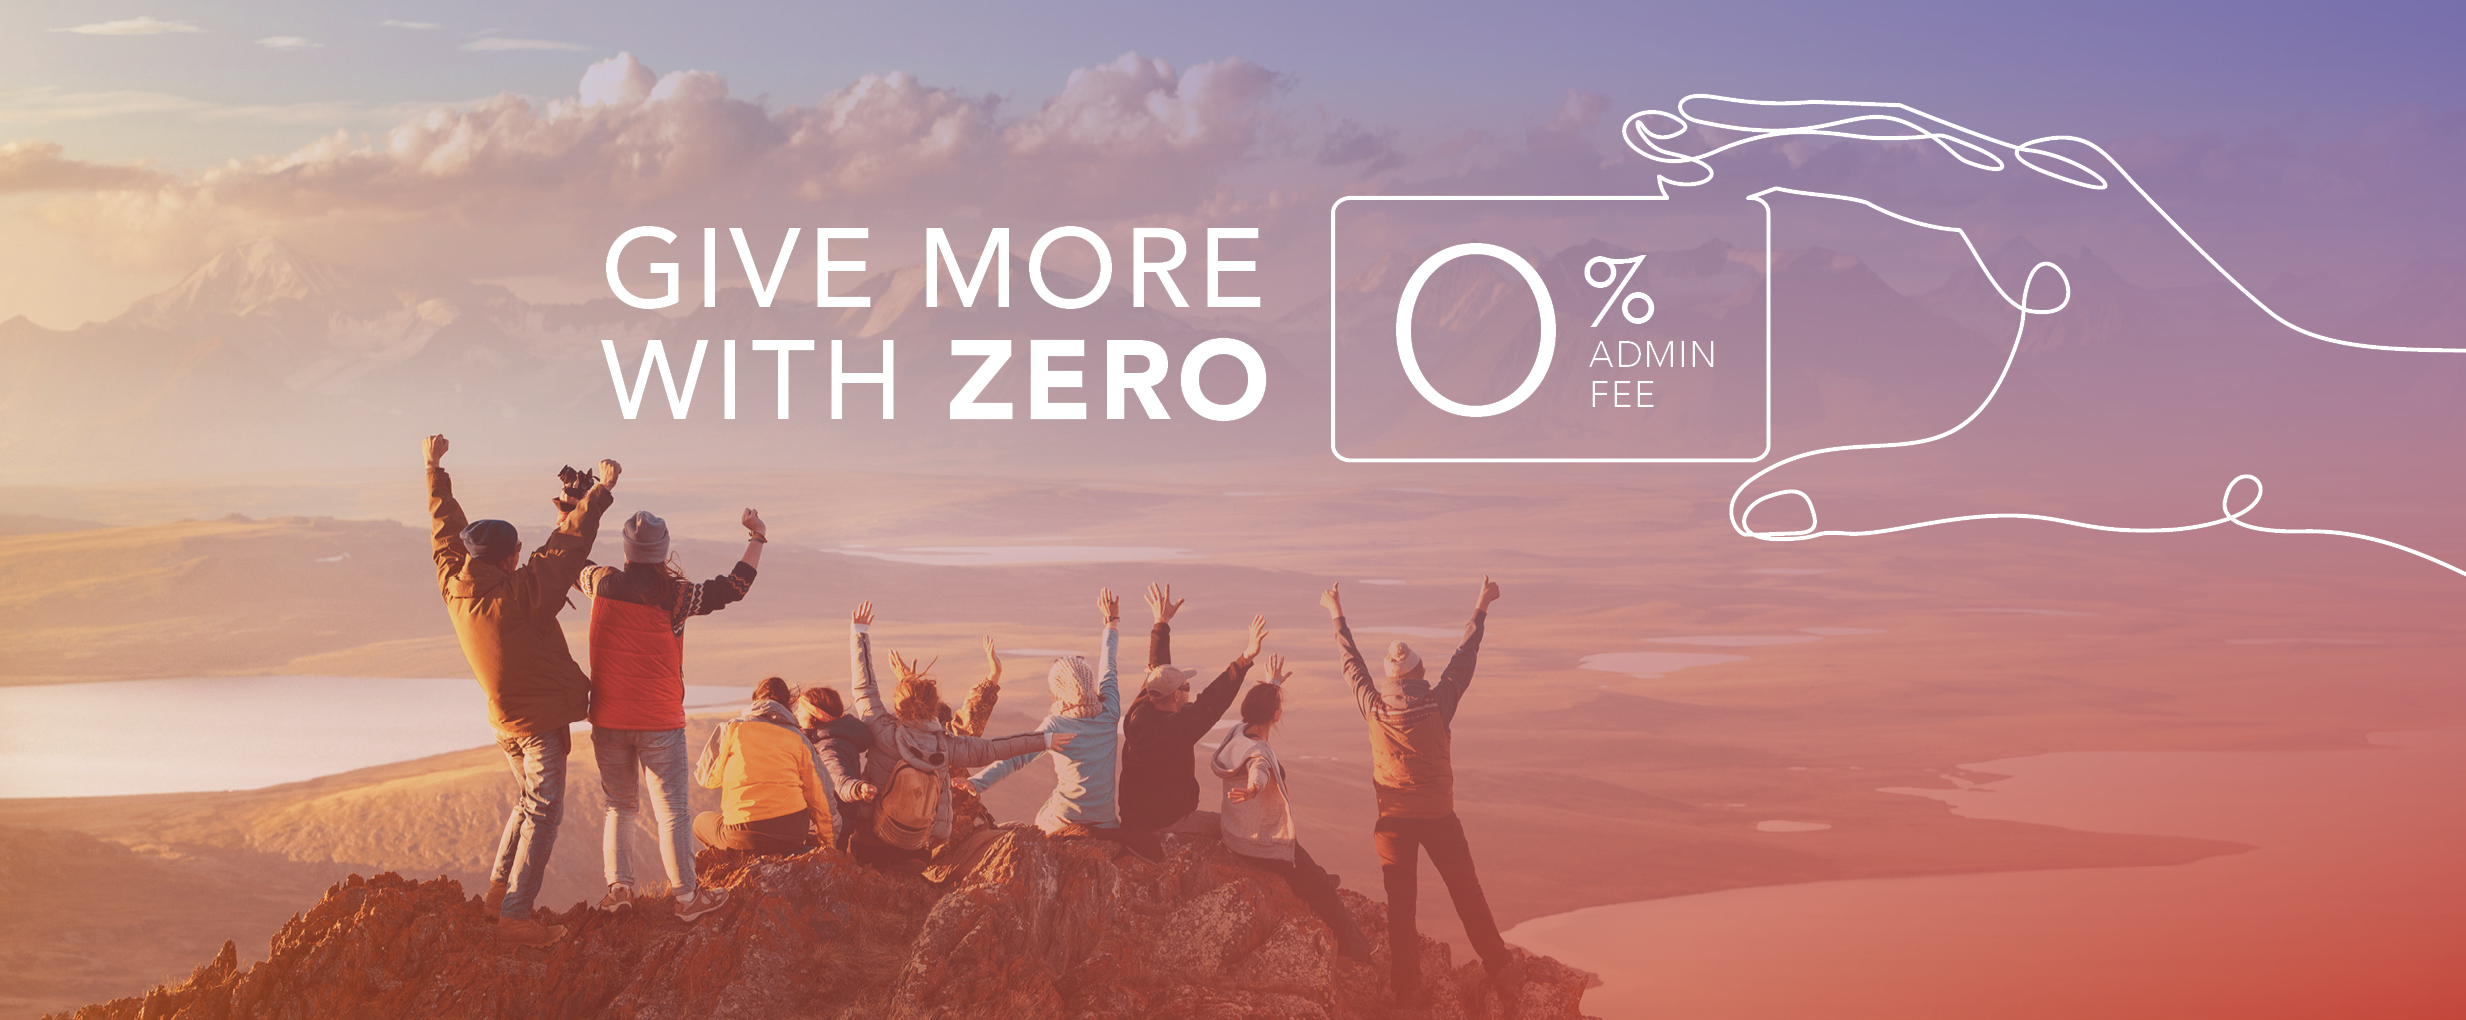 Give More With Zero